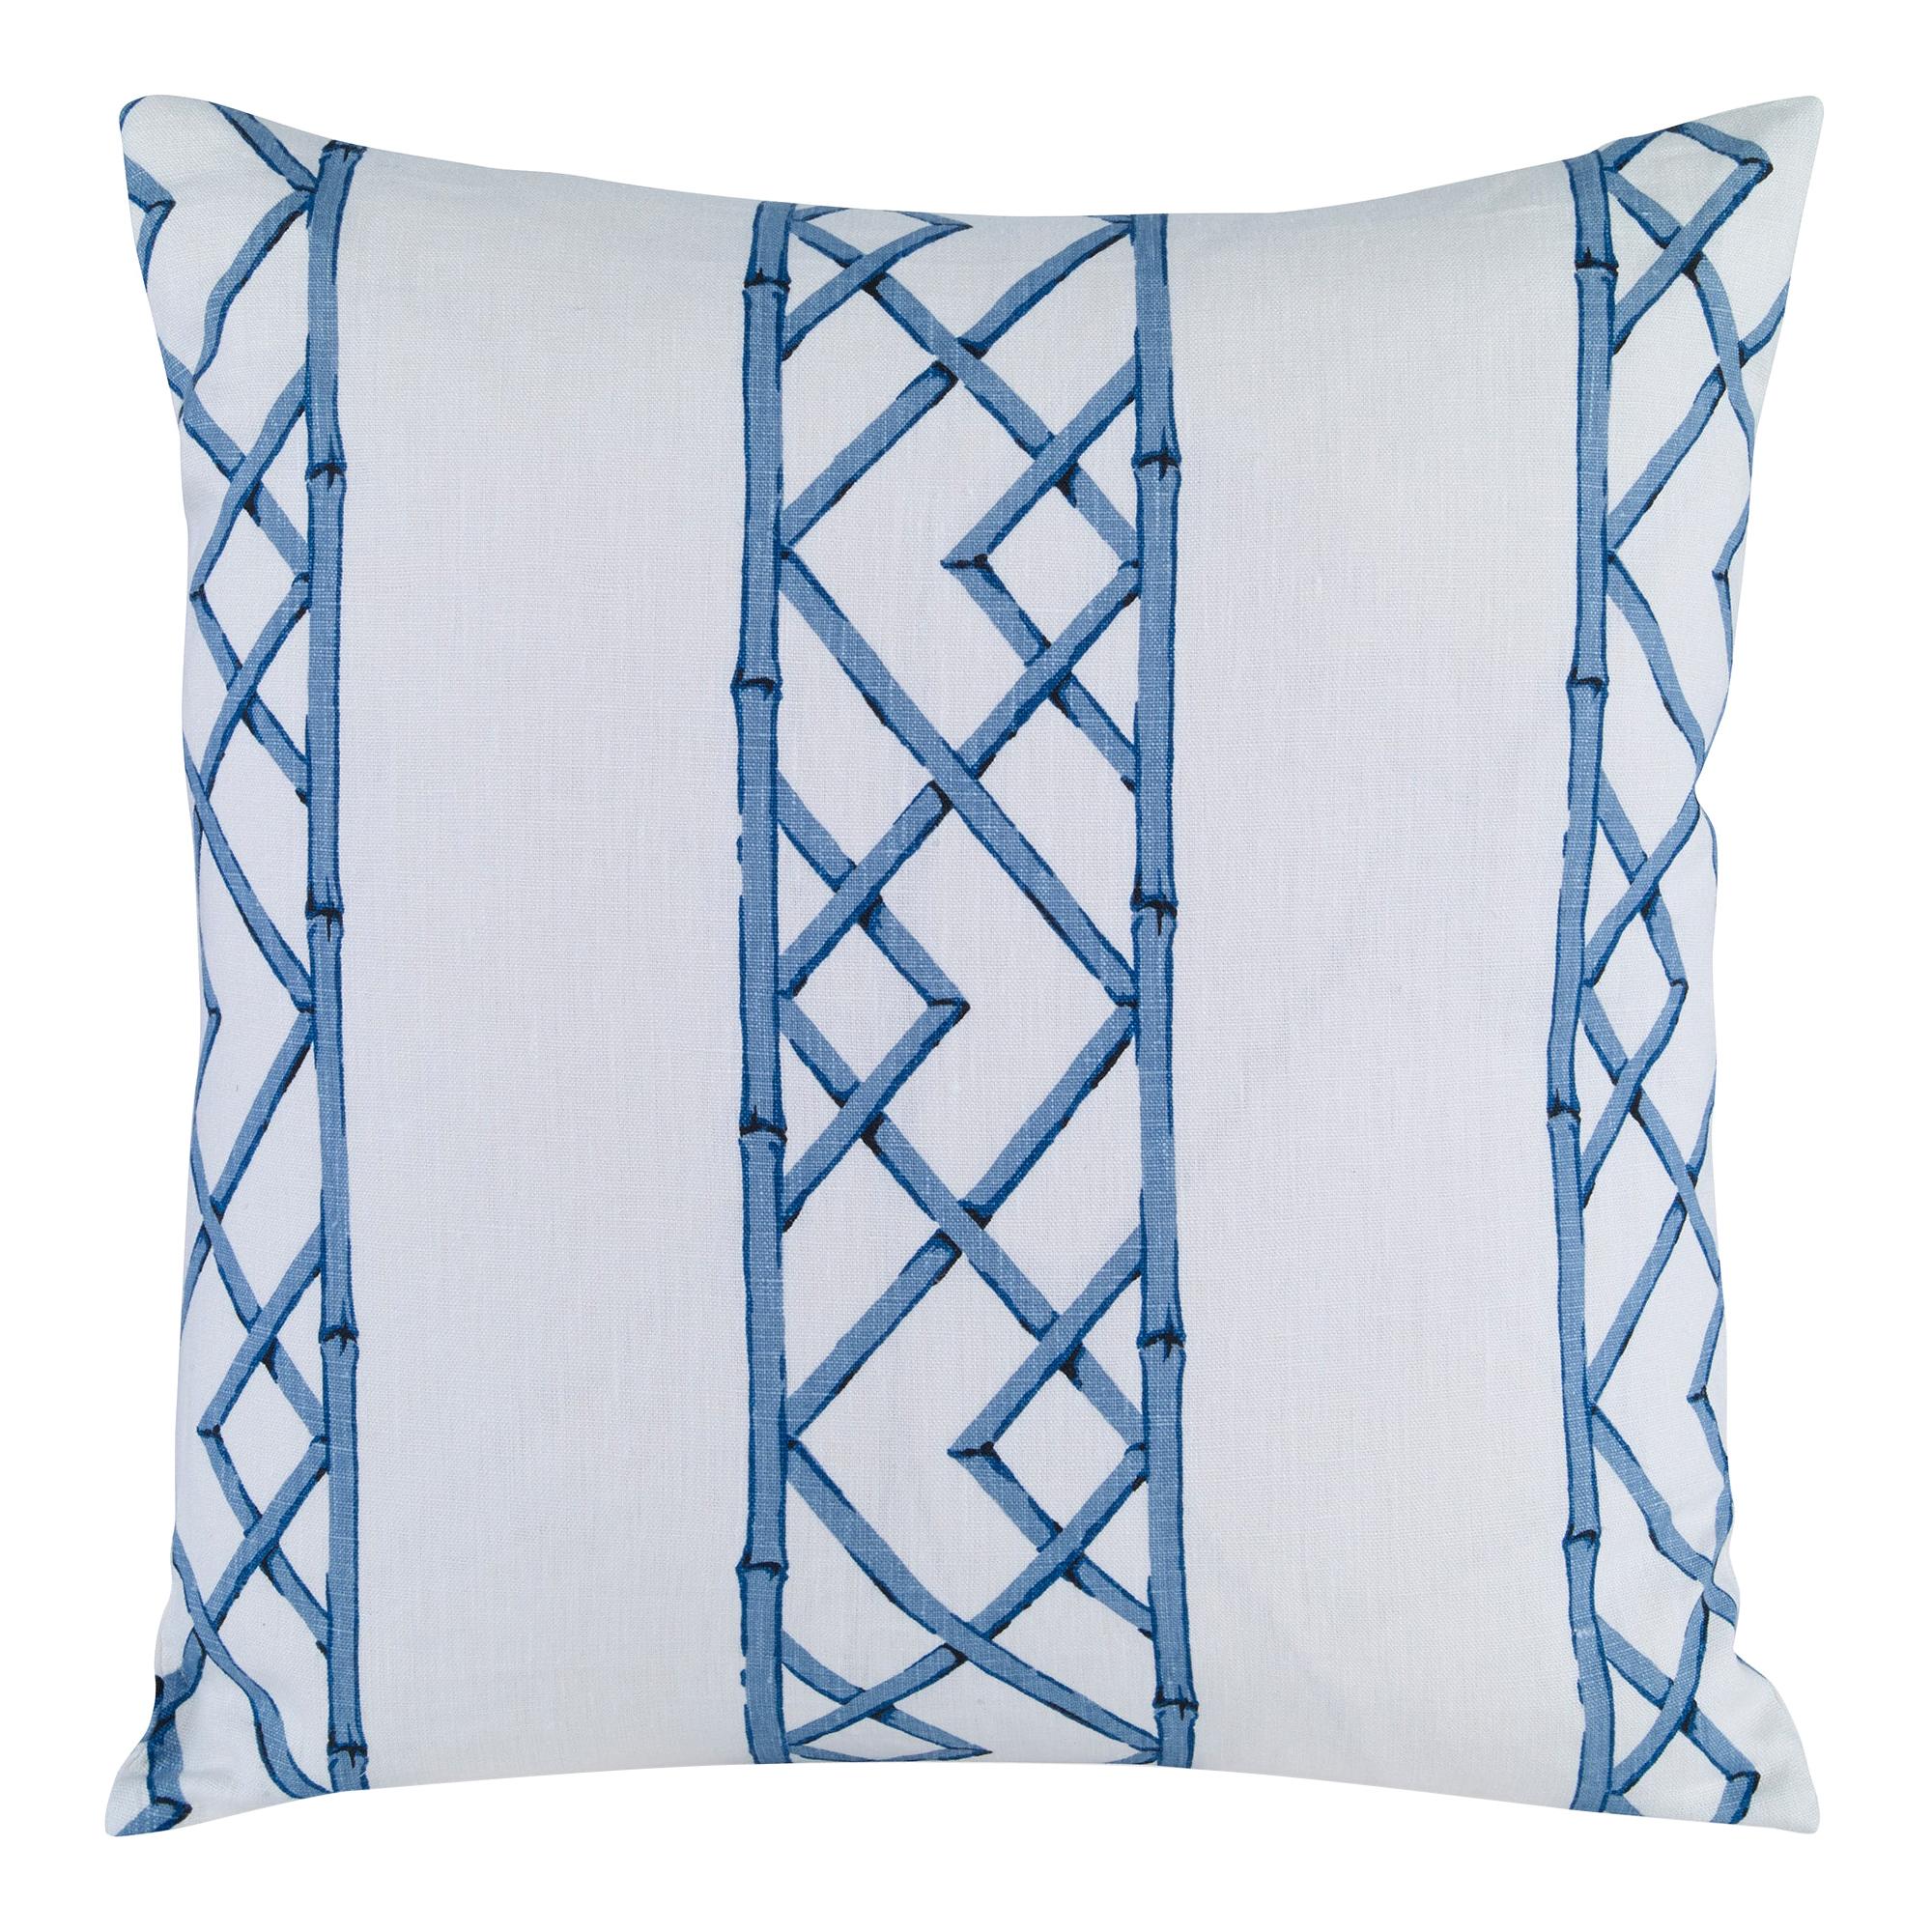 Latticely Pillow in Ultramarine by Curatedkravet